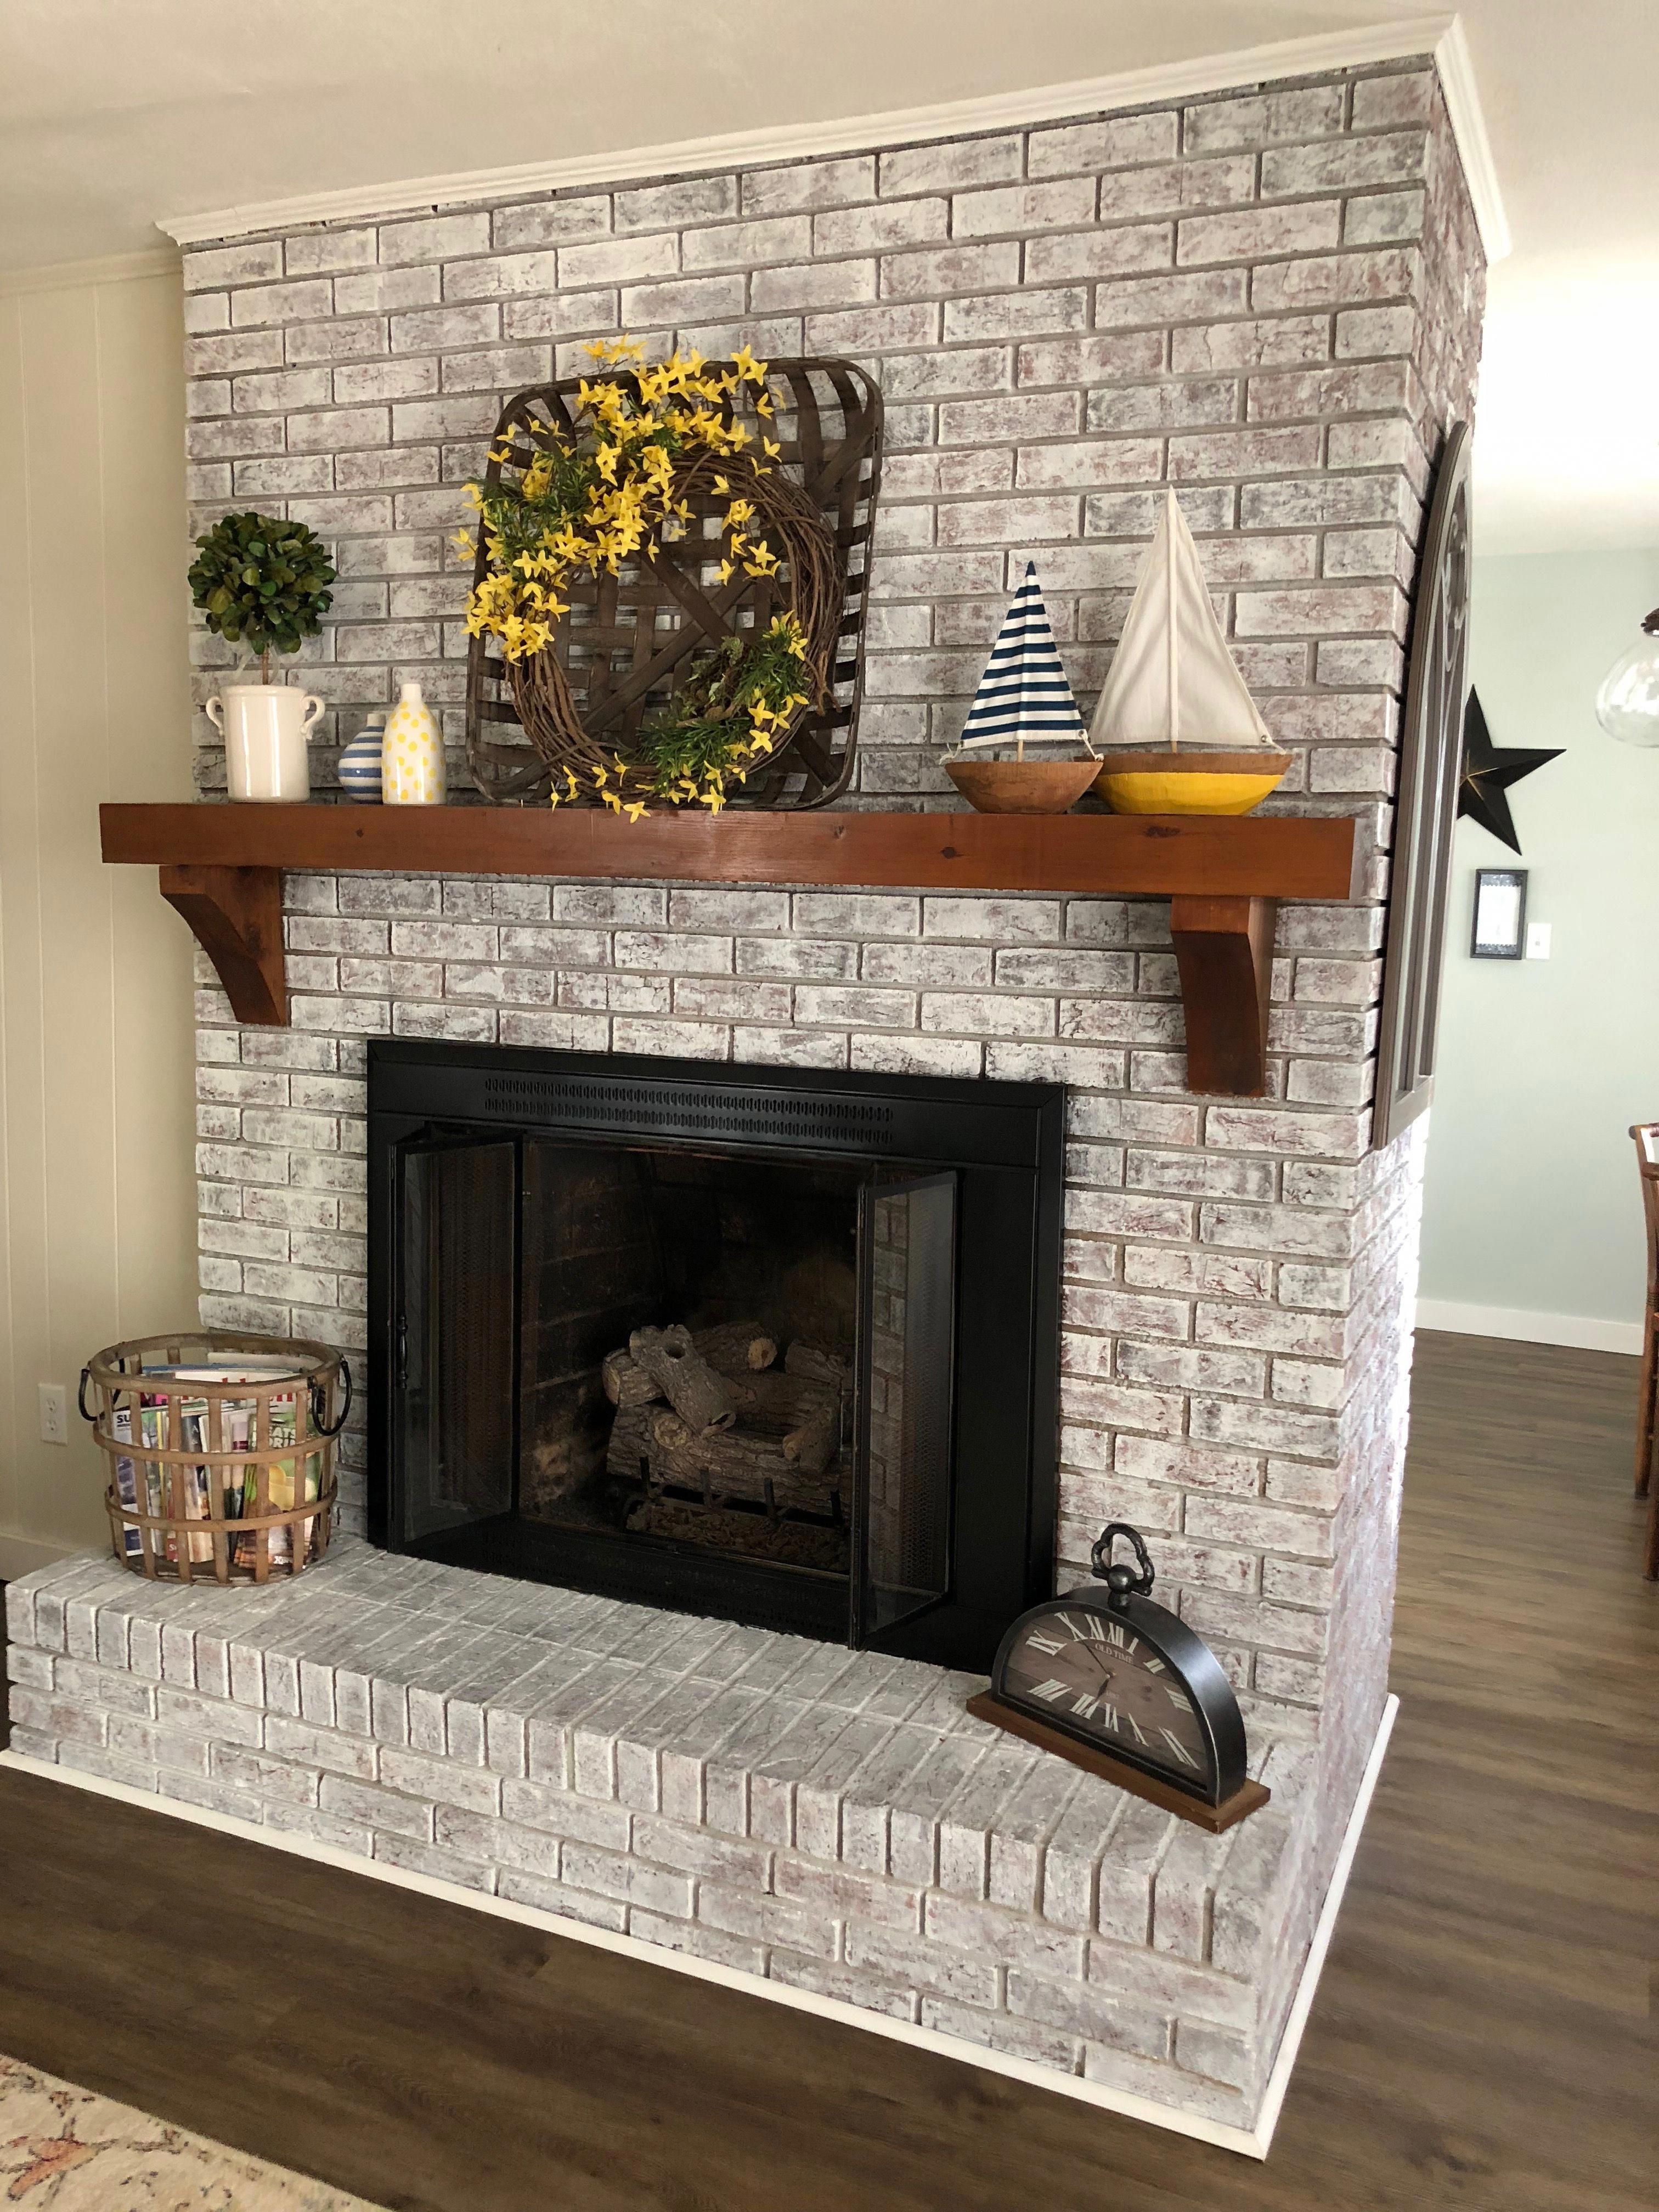 Picture Above Fireplace Lovely Painted Brick Fireplace Sw Pure White Over Dark Red Brick